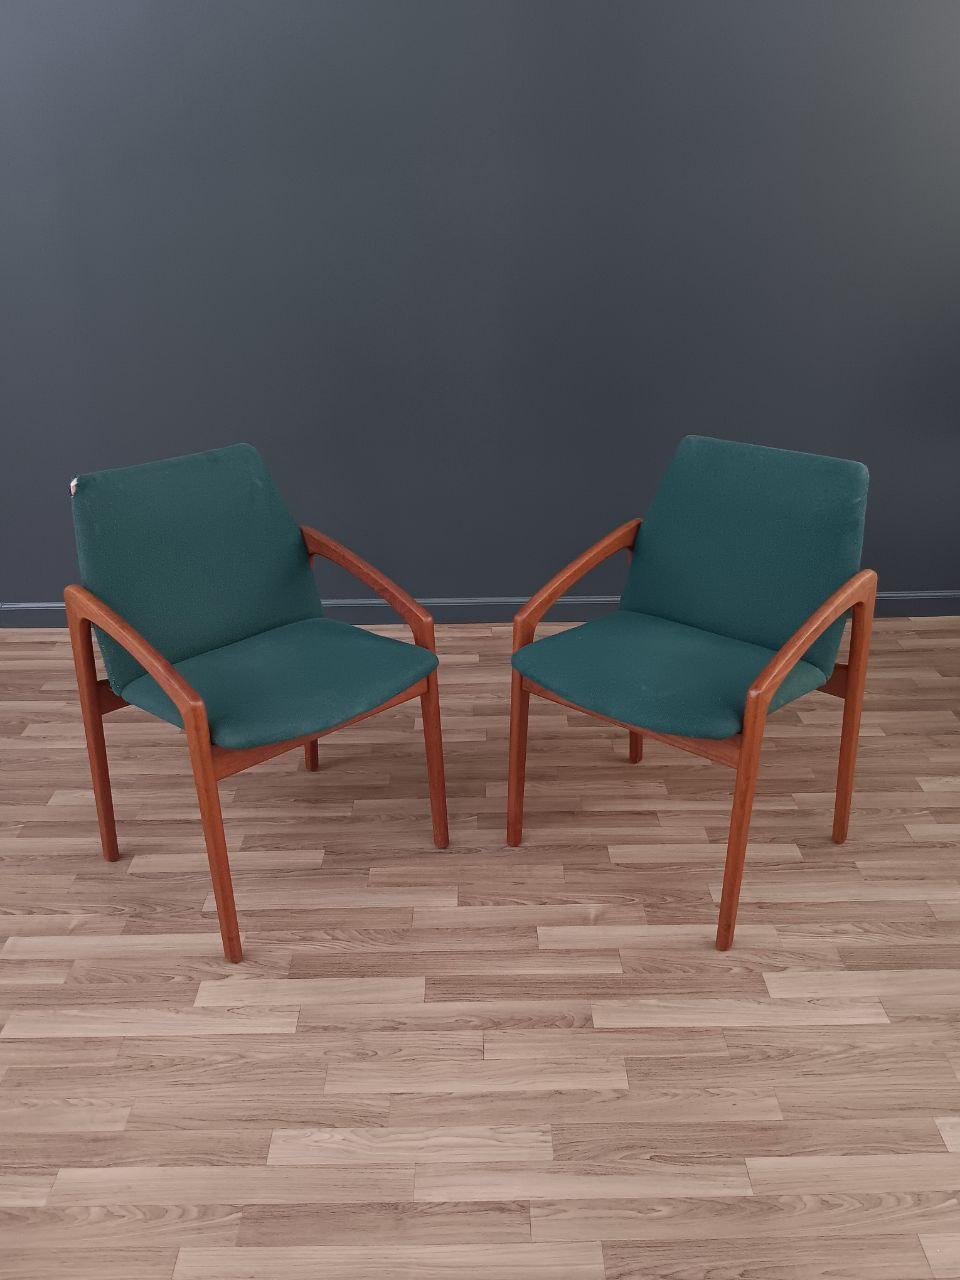 Mid-20th Century Set of 4 Mid-Century Danish Modern Dining Chairs by Kai Kristiansen For Sale